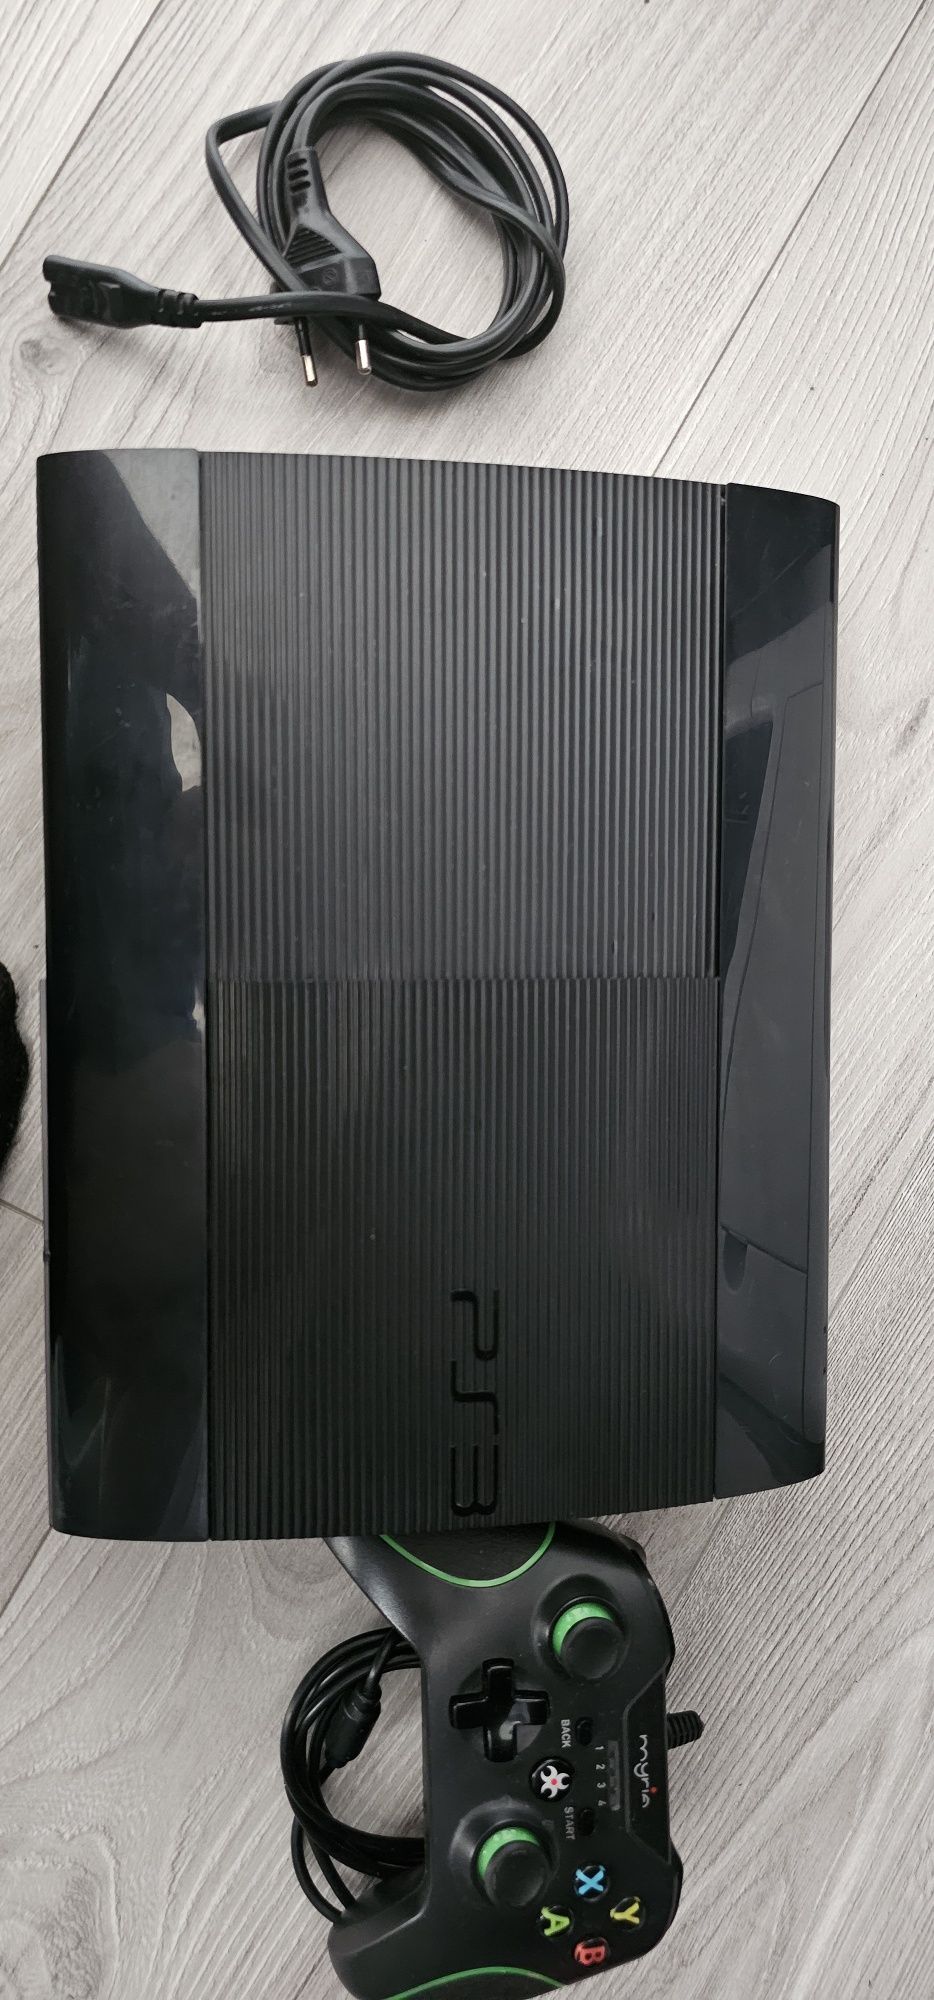 Playstation 3 PS3 MODAT HDD 500GB cu 1 maneta si cablurile necesare